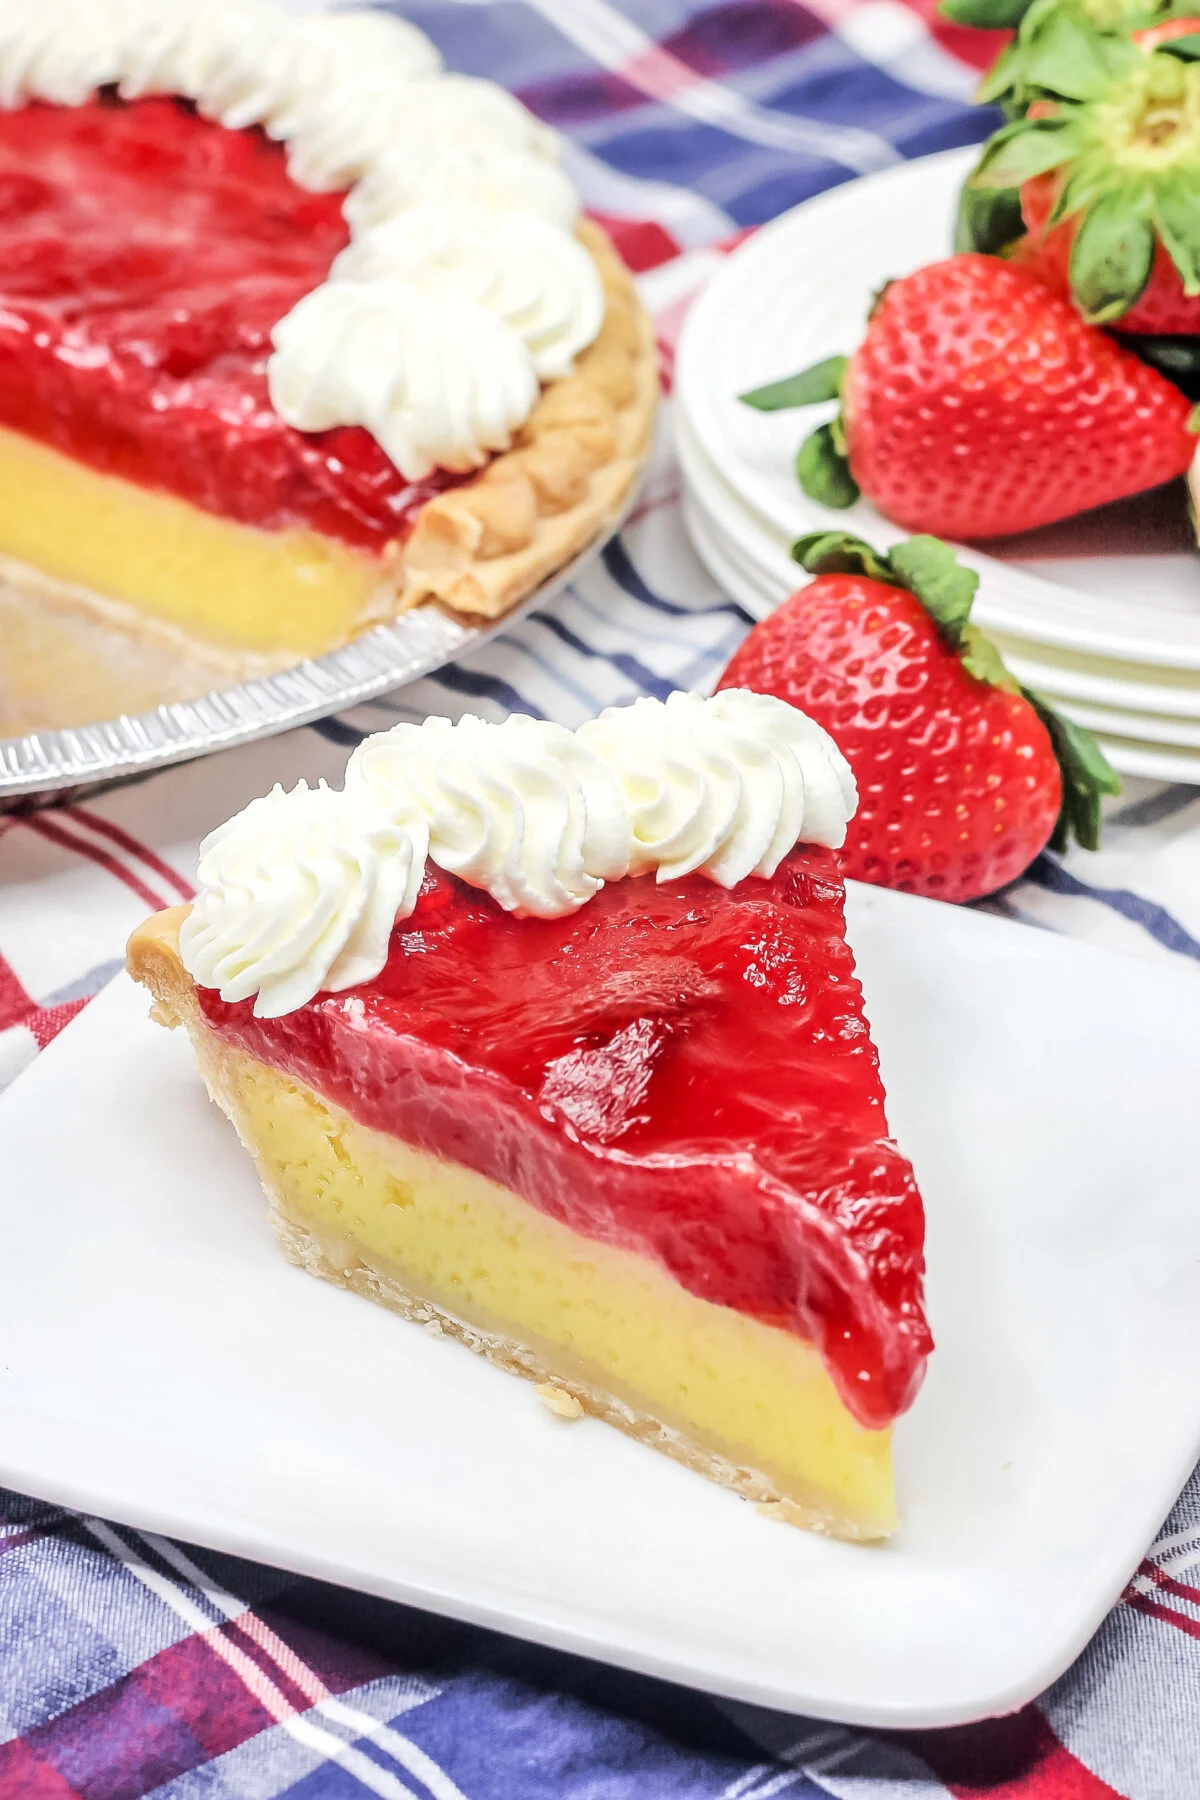 Smooth, custardy, tangy and sweet, this Strawberry Lemon Chess Pie is made with the classic recipe then topped with strawberry pie filling!